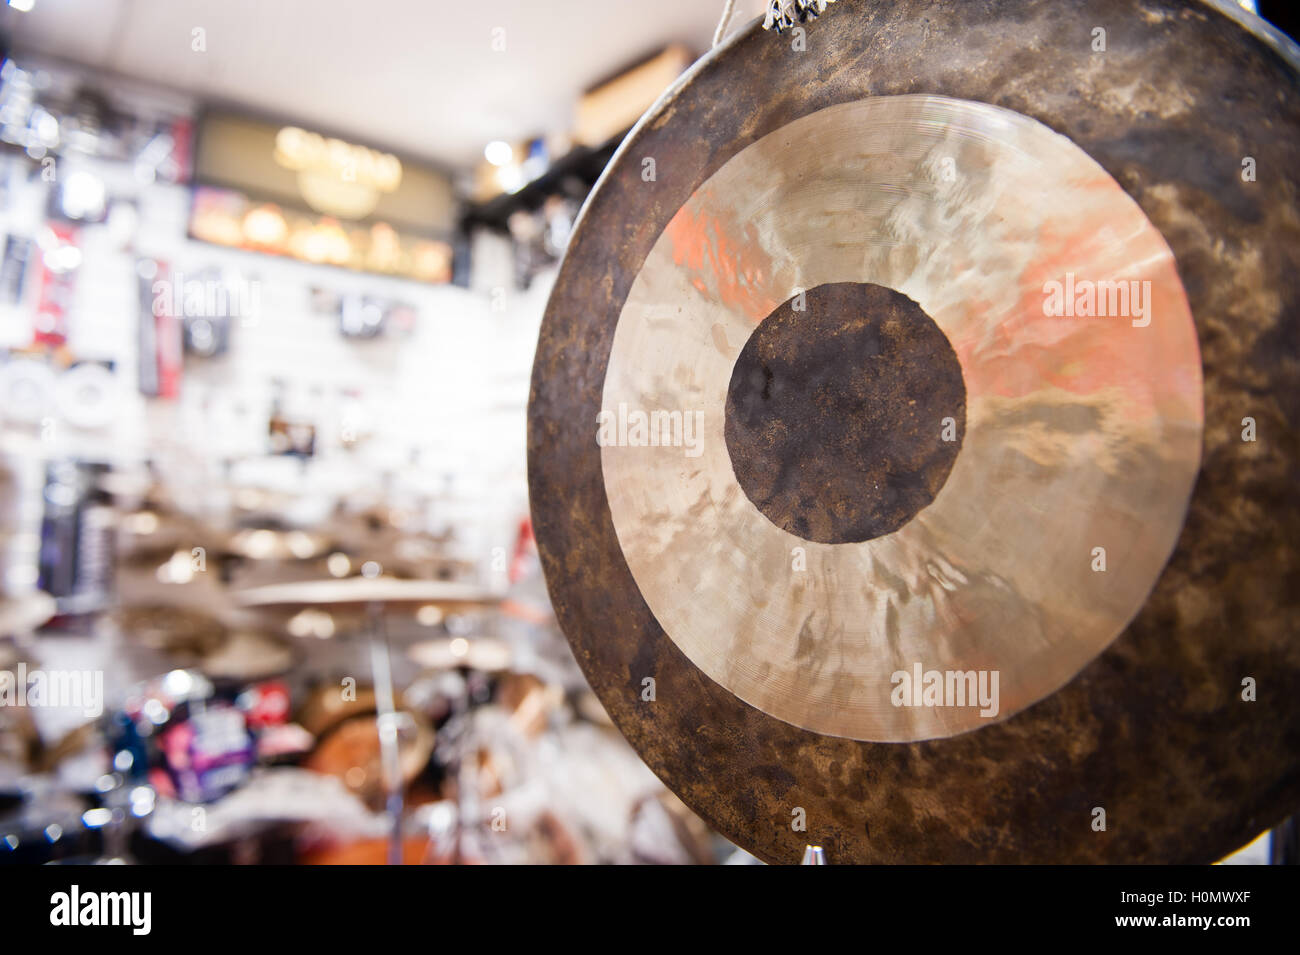 Gong percussion instrument close up with out of focus drum shop in background Stock Photo